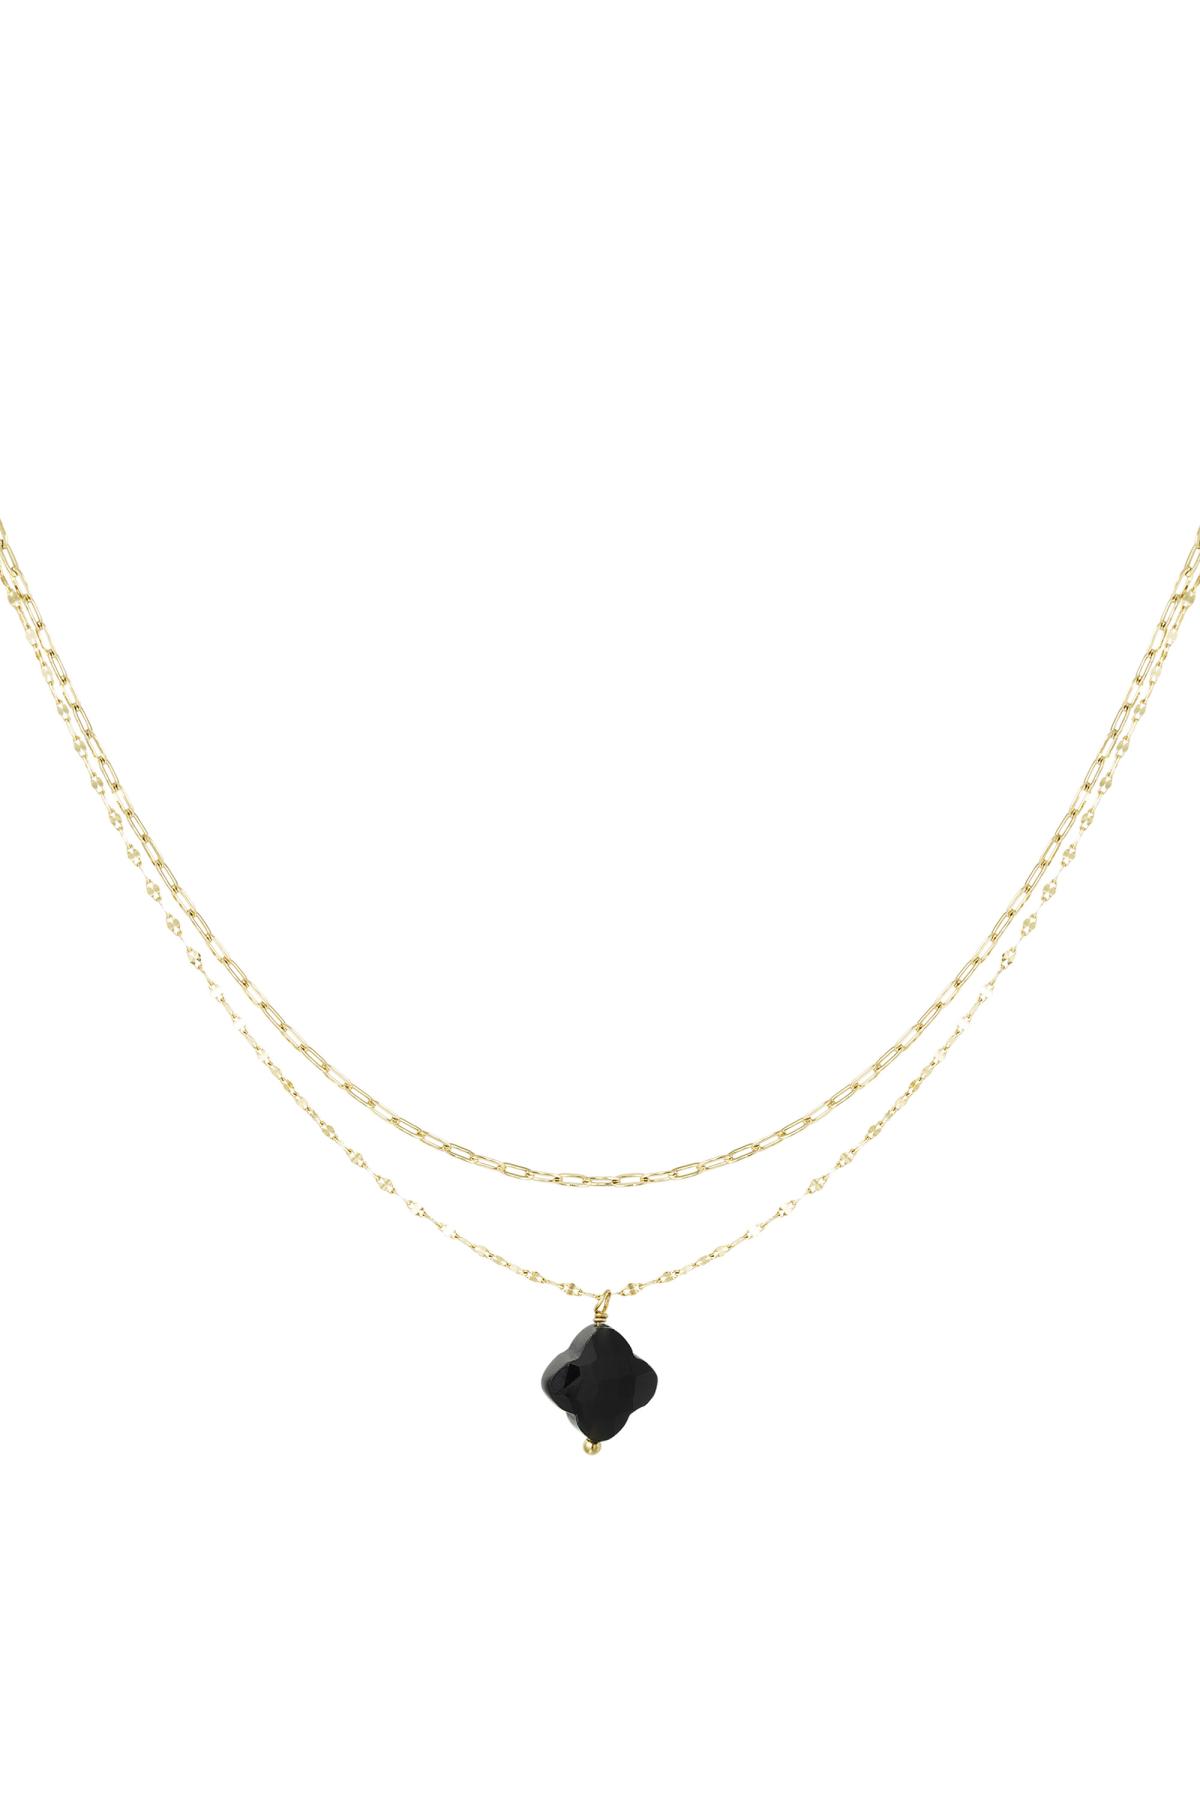 Double necklace with clover pendant - Natural stones collection Black &amp; Gold Stainless Steel